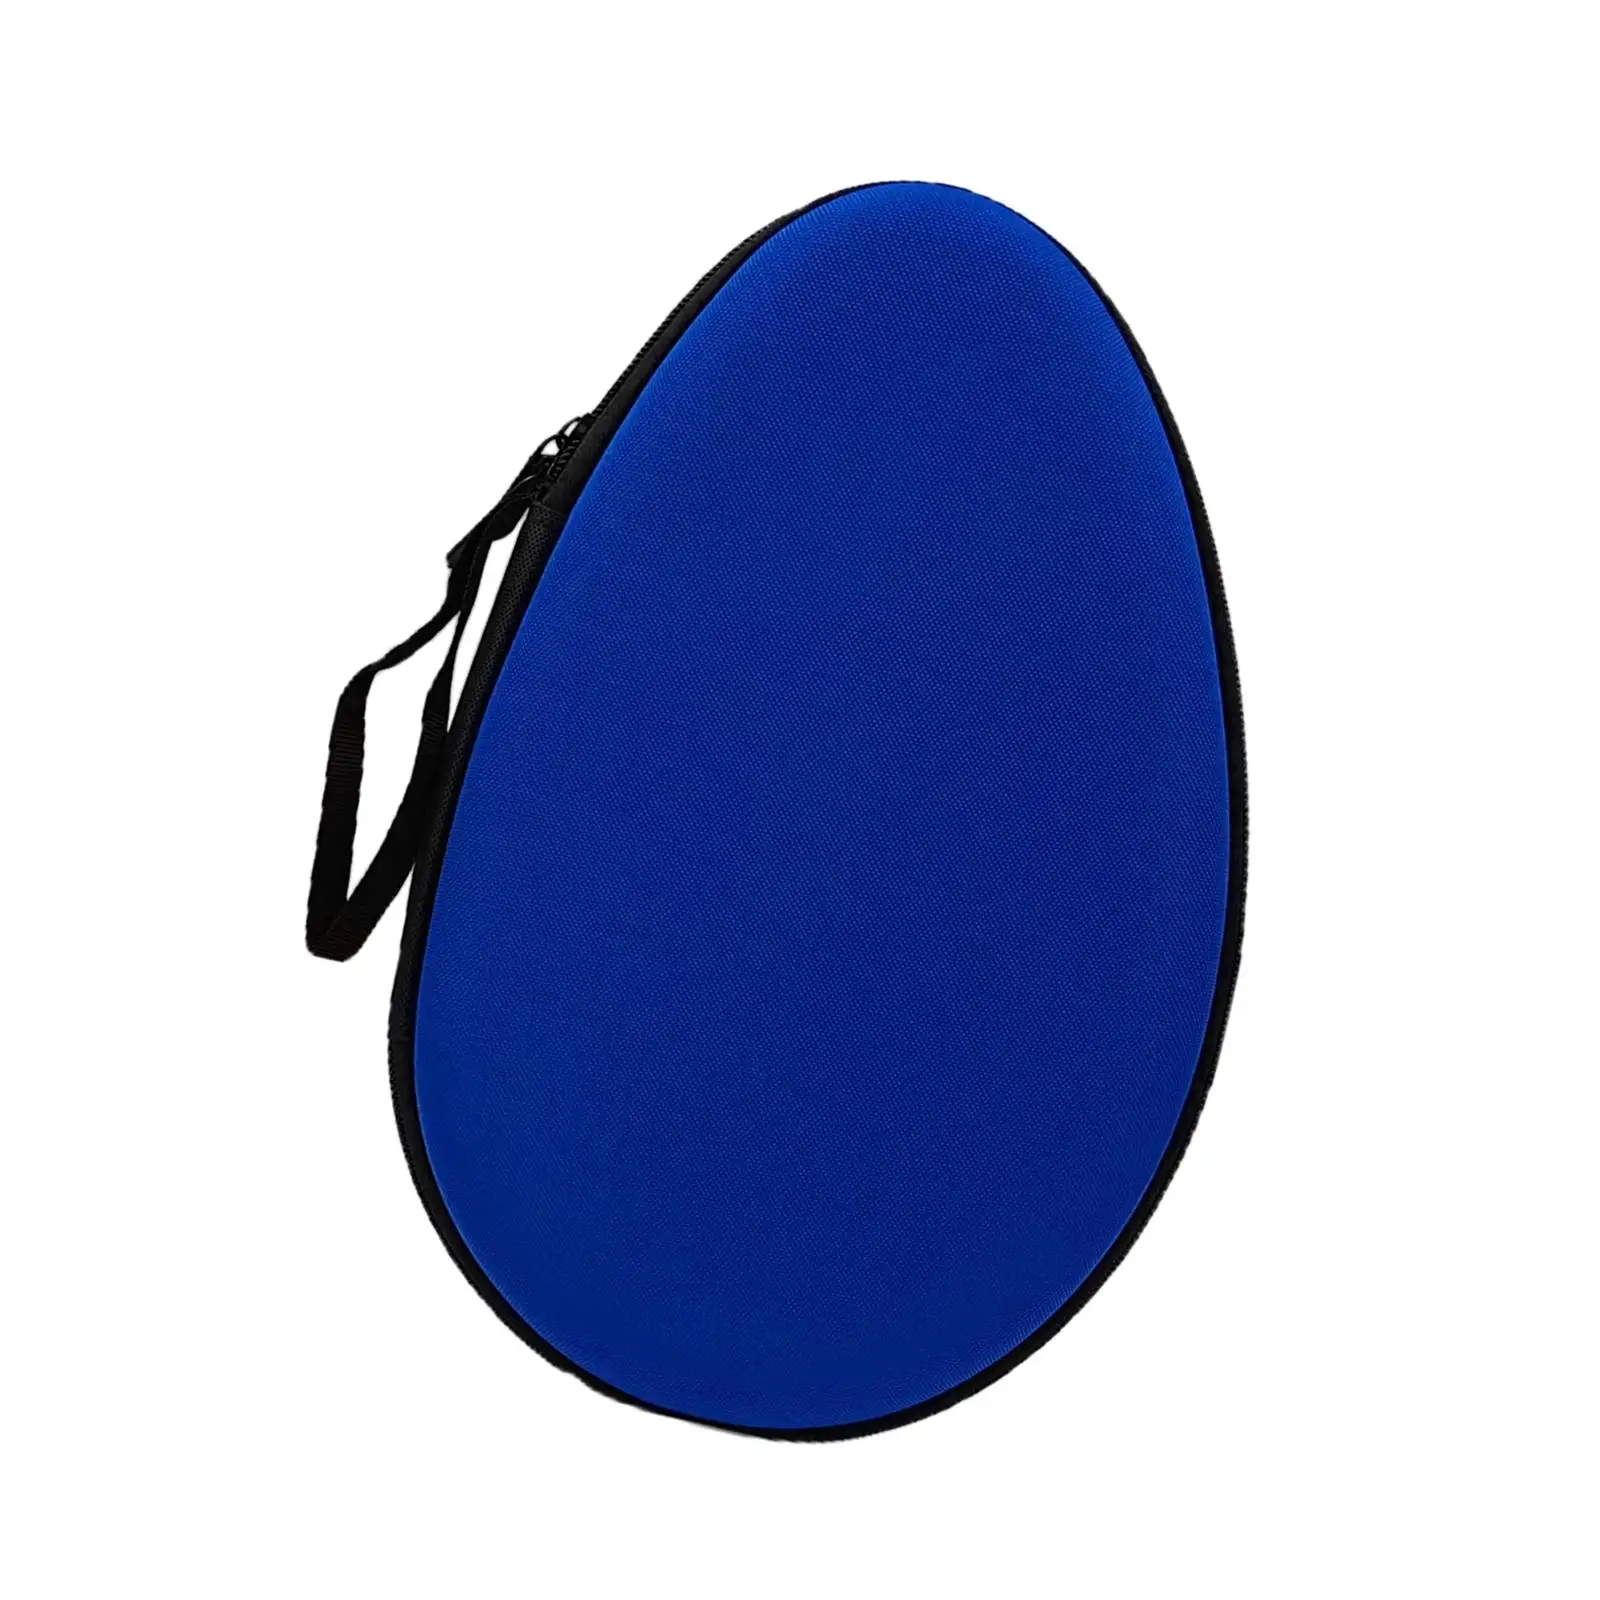 Portable Table Tennis Racket Bag Waterproof Reusable Sturdy Lightweight Ping Pong Paddle Pocket for Training Competition Outdoor